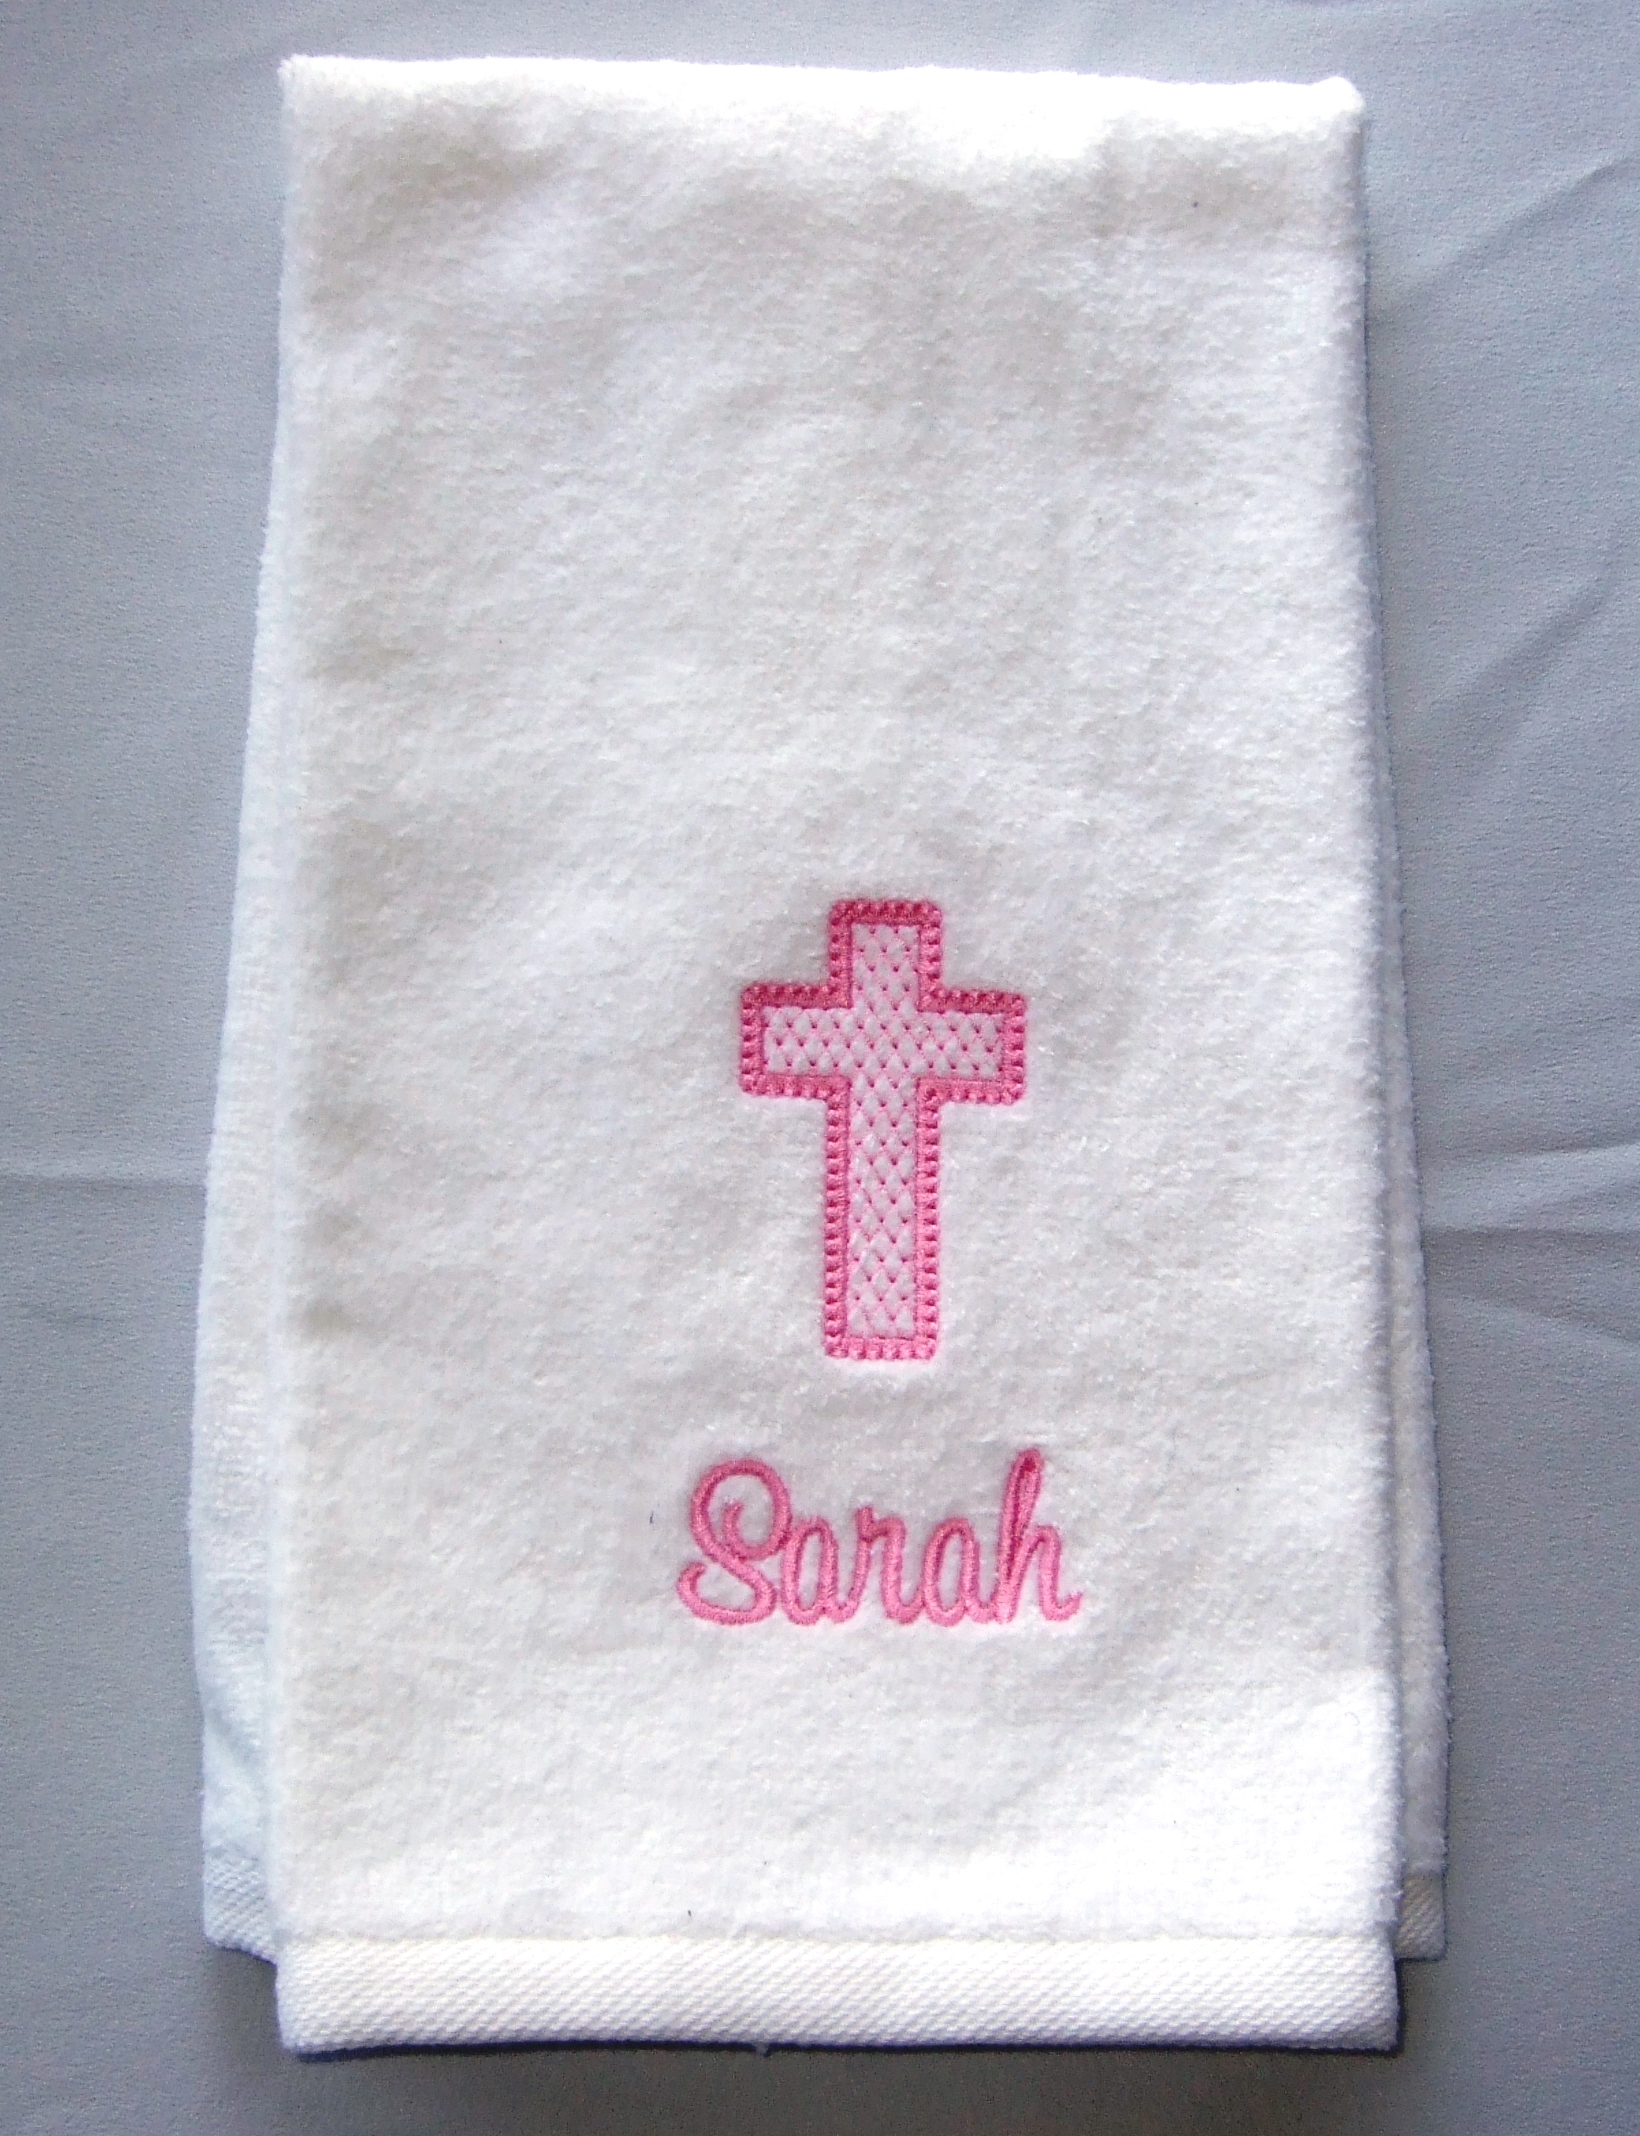 Baptismal towel with pink light fill cross and baby's name